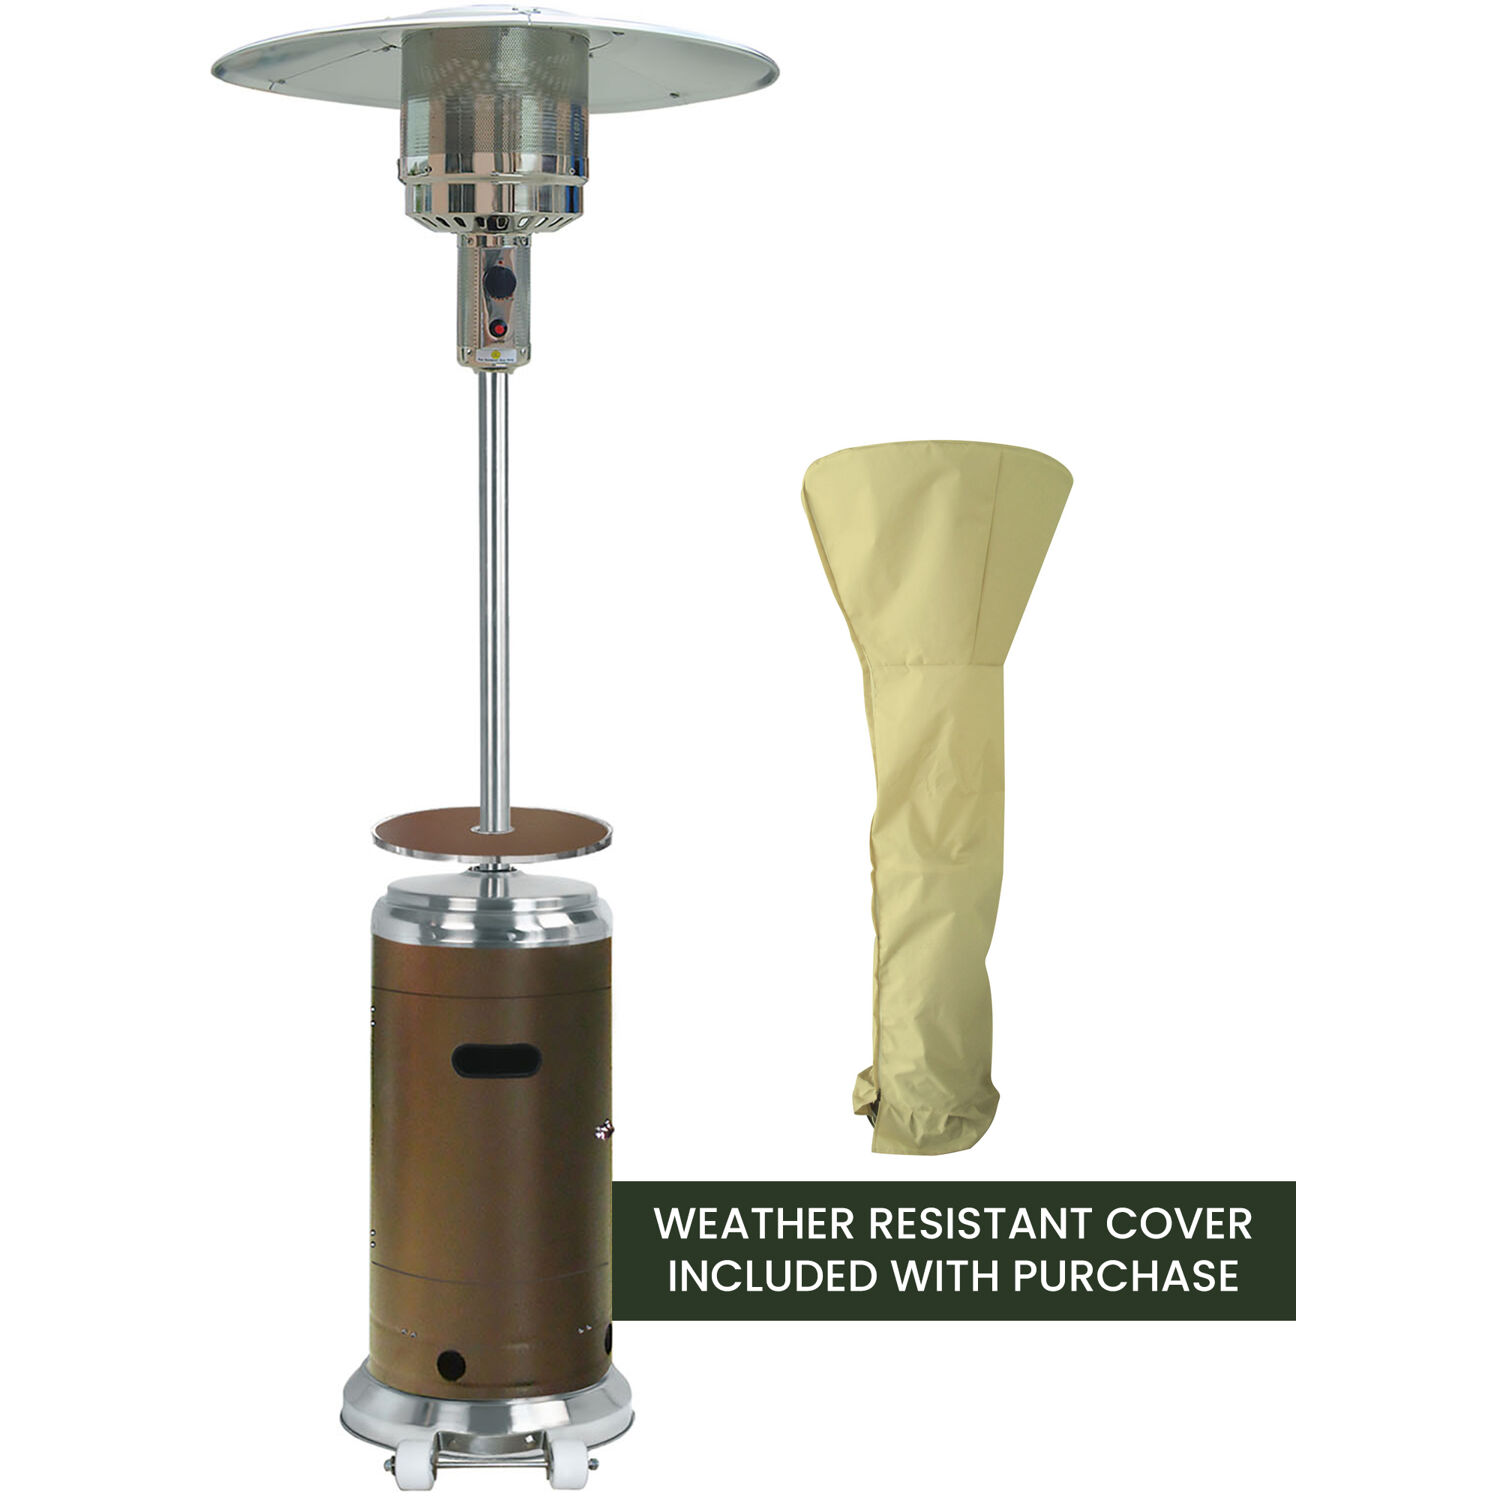 Hanover 7-Ft. 48,000 BTU Steel Umbrella Propane Patio Heater in Bronze, Stainless Steel with Weather-Protective Cover | Outdoor Heating for Patio, Backyard, Deck, Porch | Caster Wheels | HAN002BRSS-CV - image 1 of 9